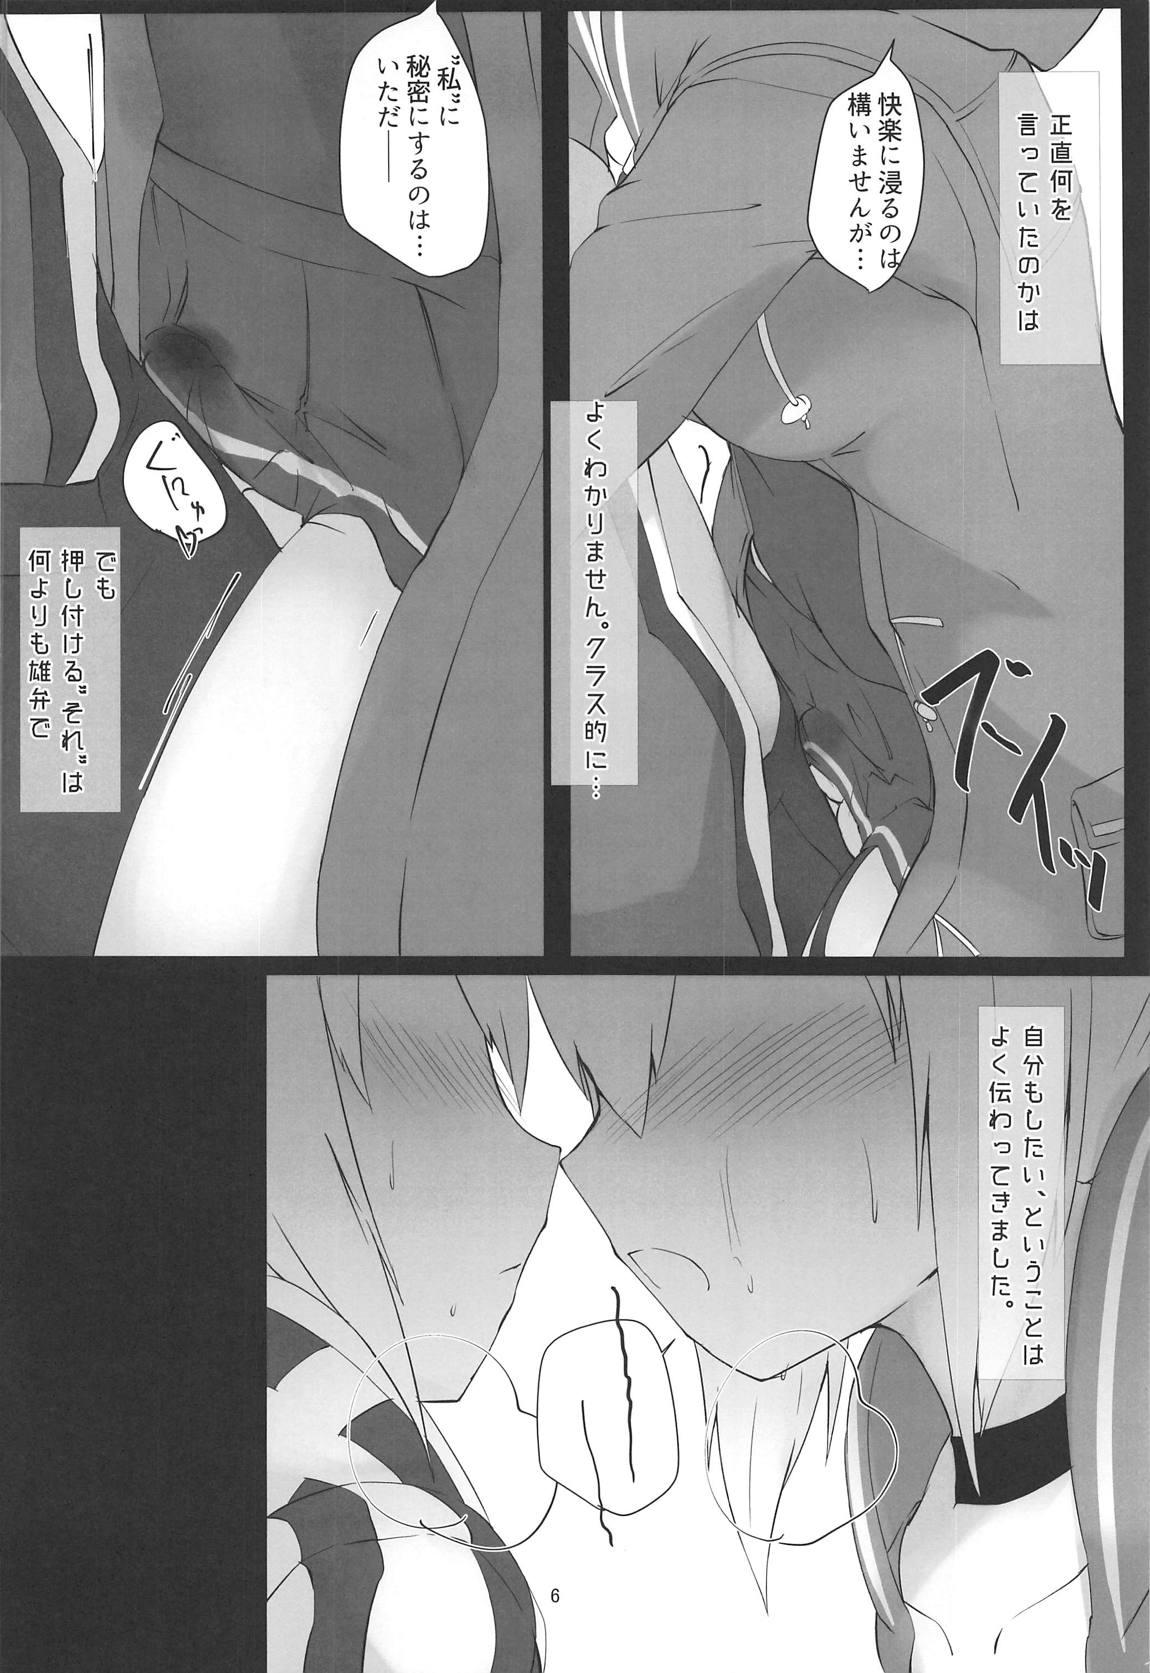 Pussysex eXXpose herself+ - Fate grand order Danish - Page 5